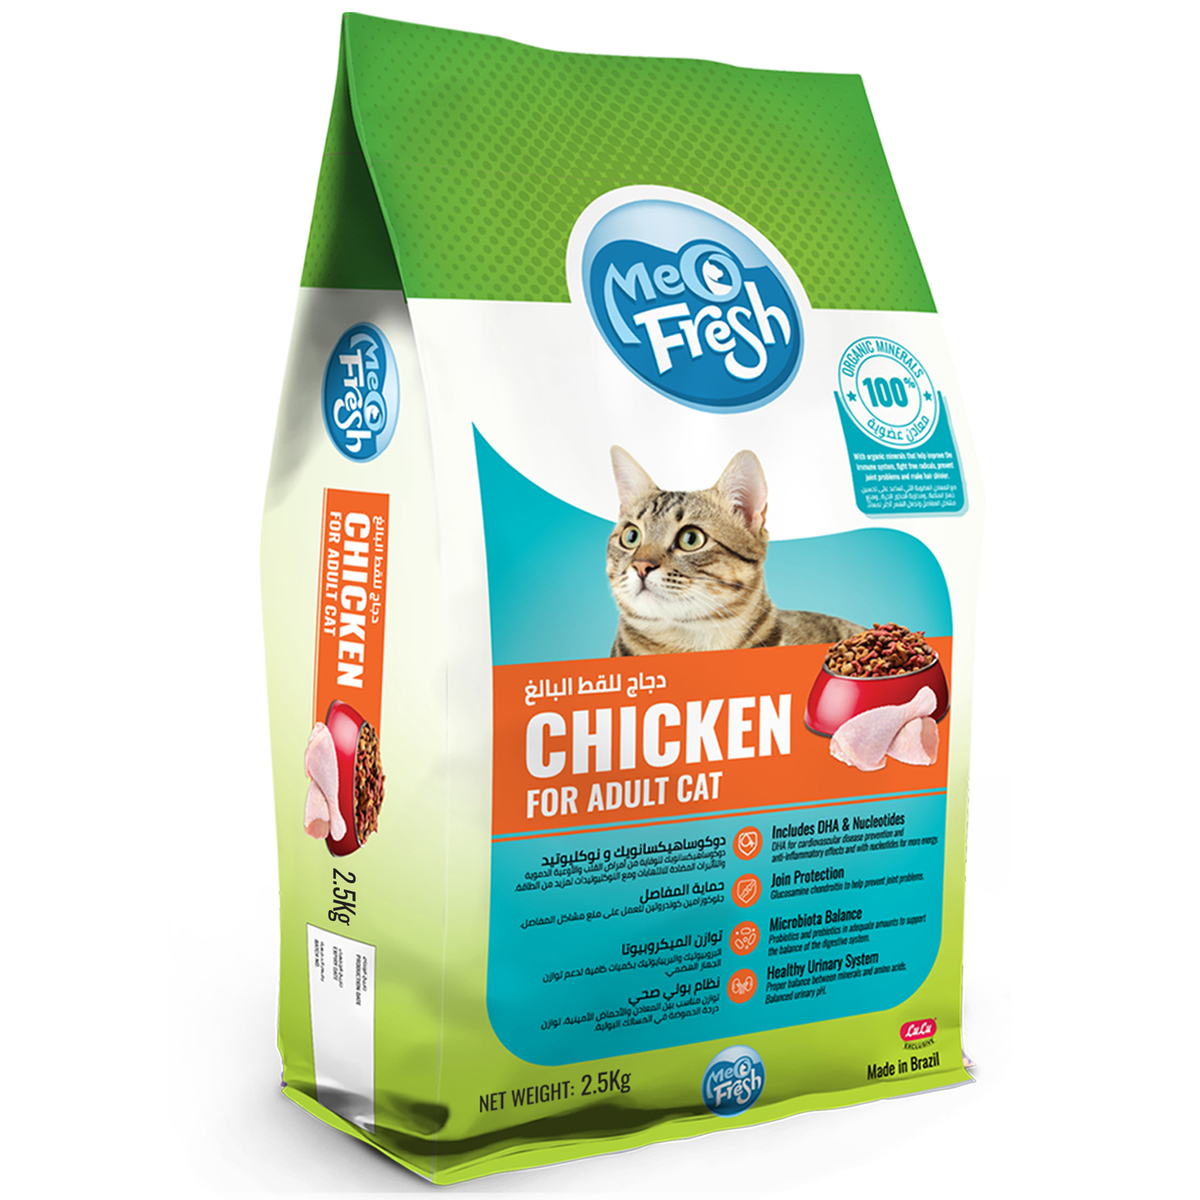 Meo Fresh Cat Food Chicken For Adult Cat 2.5 kg